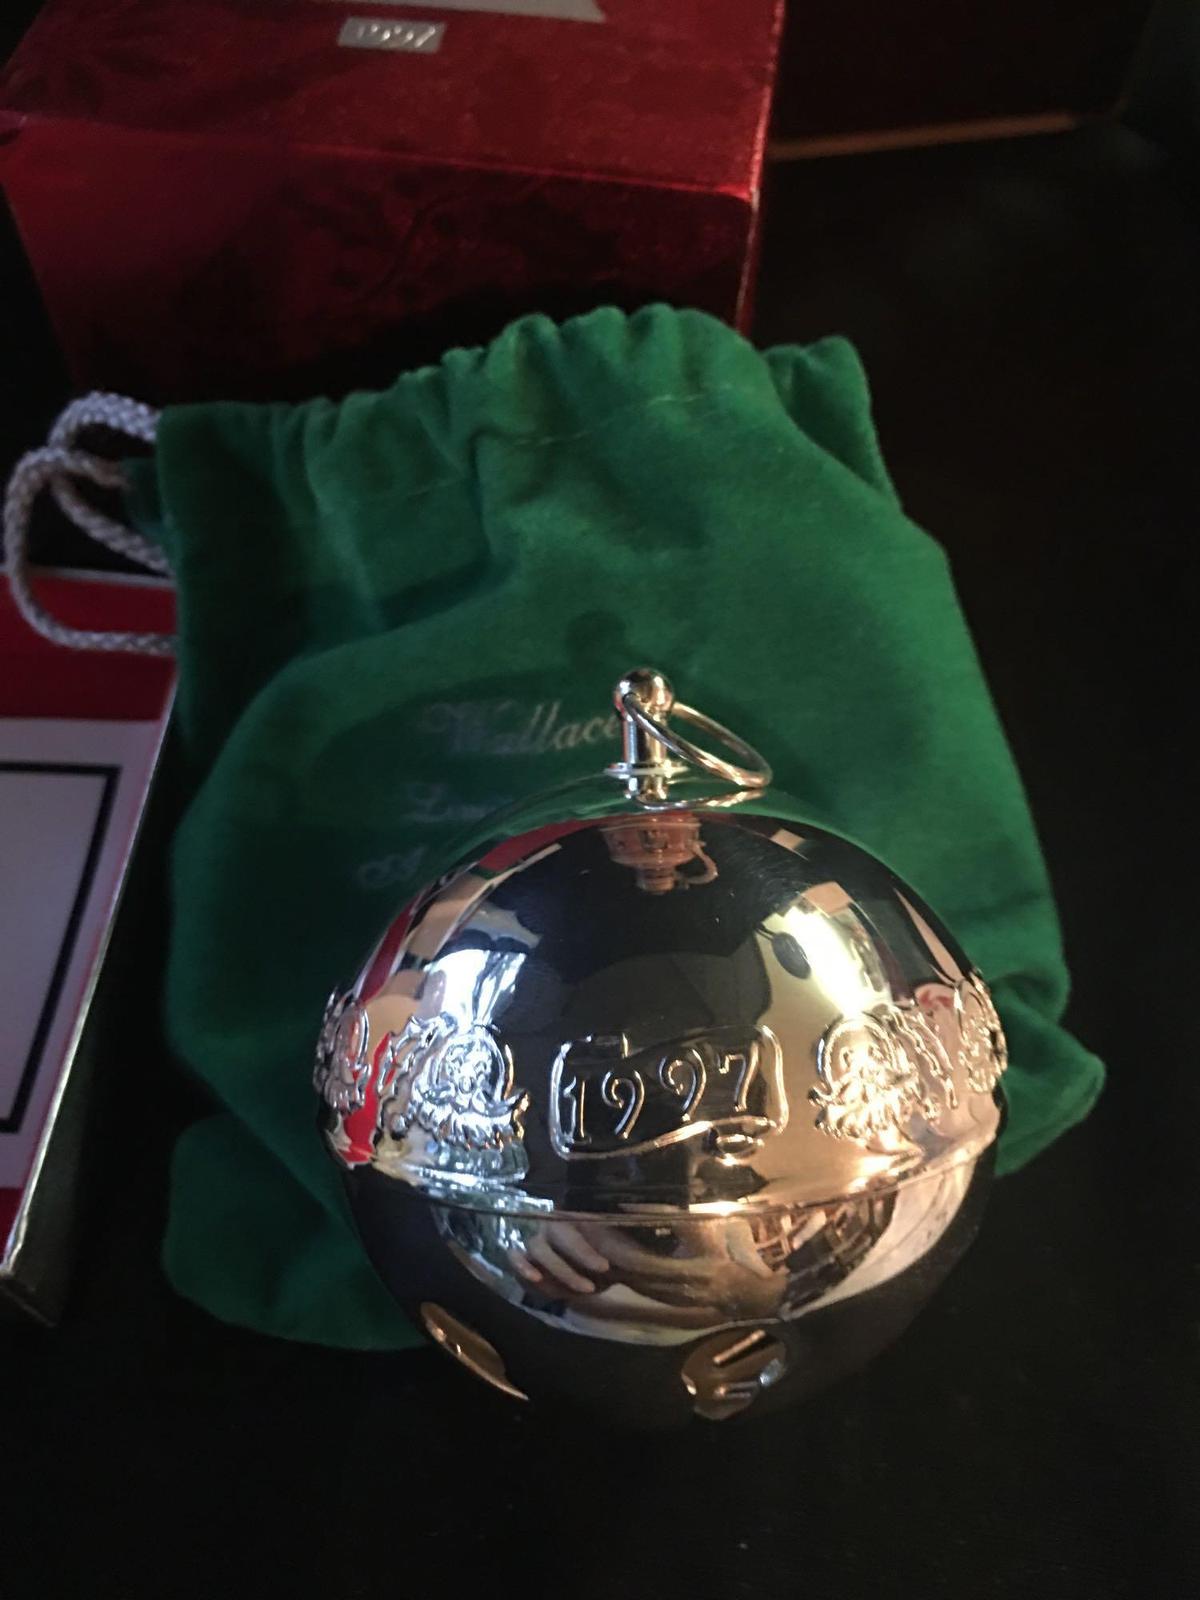 1997 Wallace Silversmiths Christmas Bell